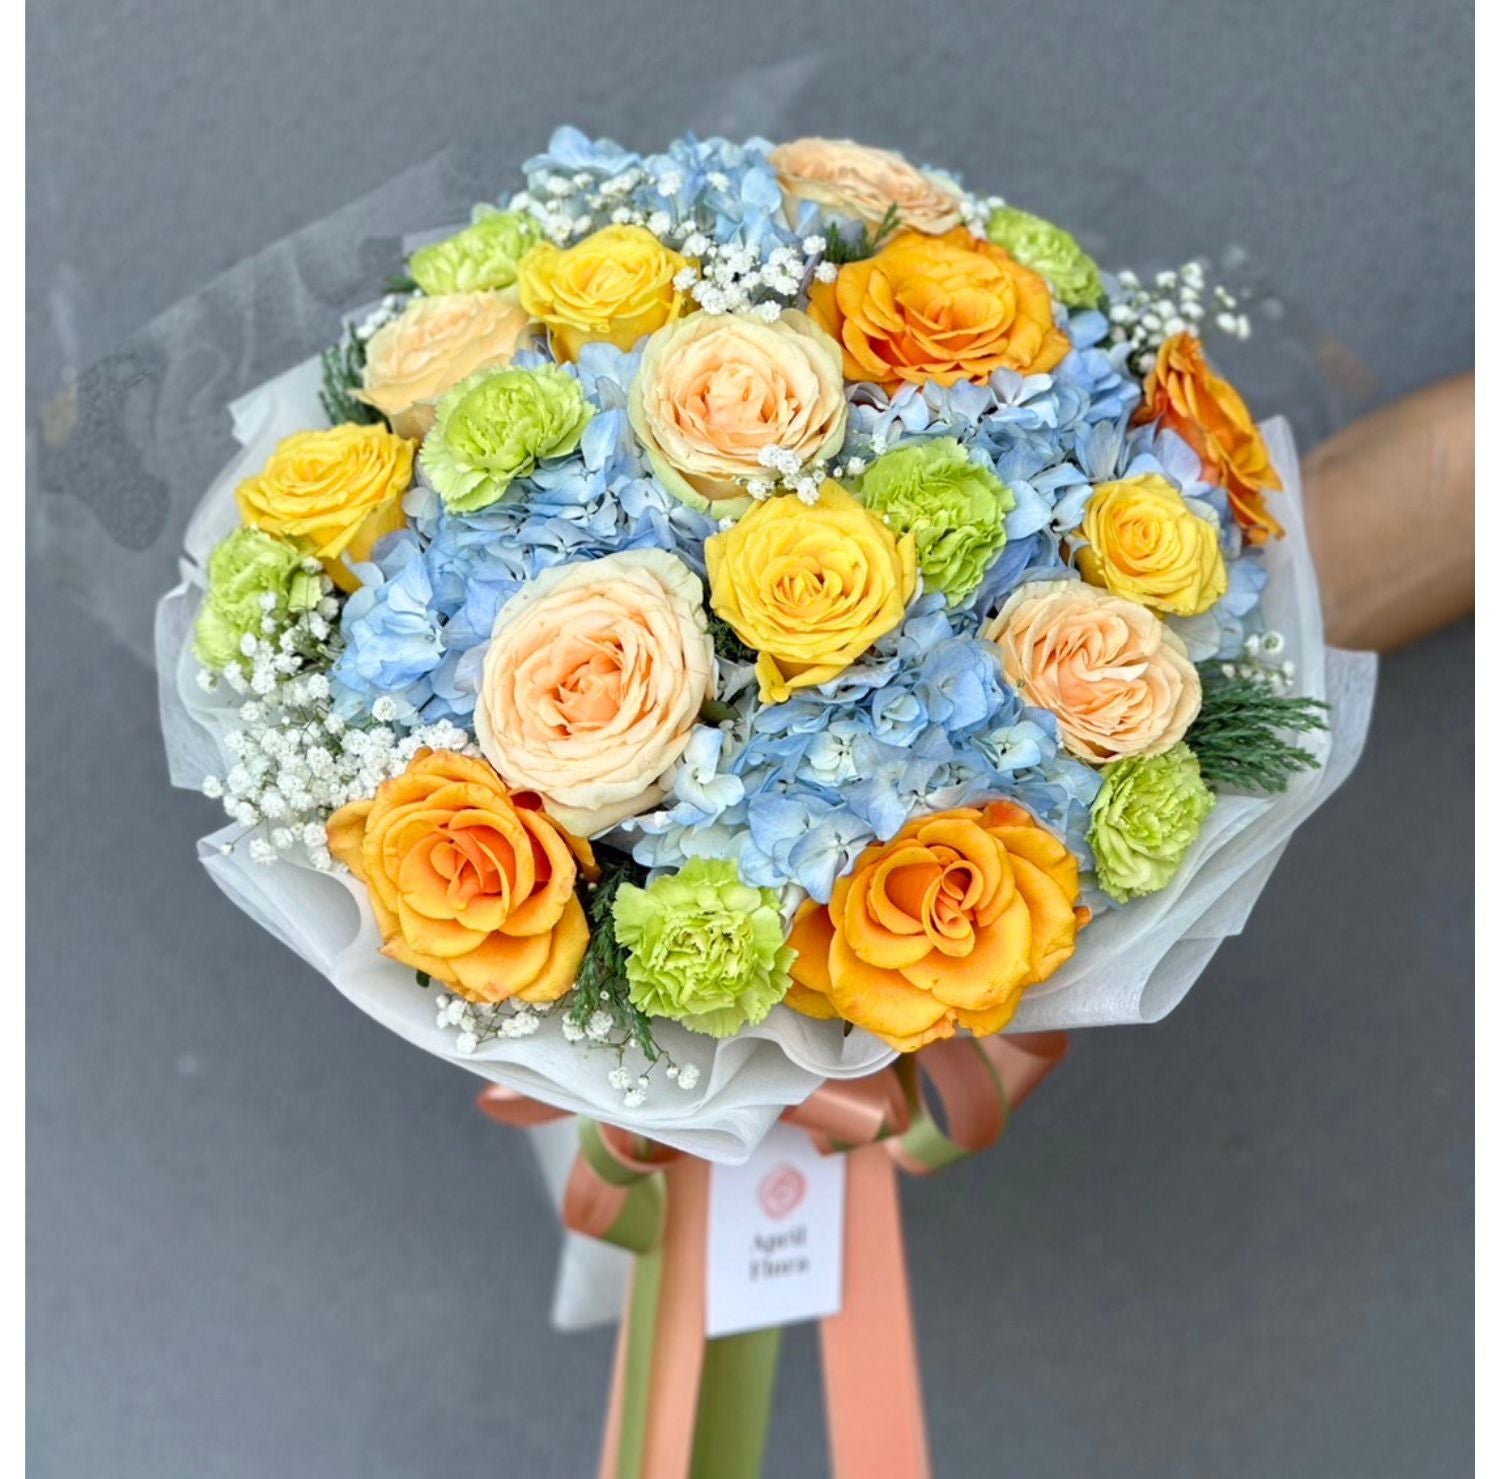 Lovely Bouquet Of Hydrangea, Rose, Lisianthus and Gypso - April Flora